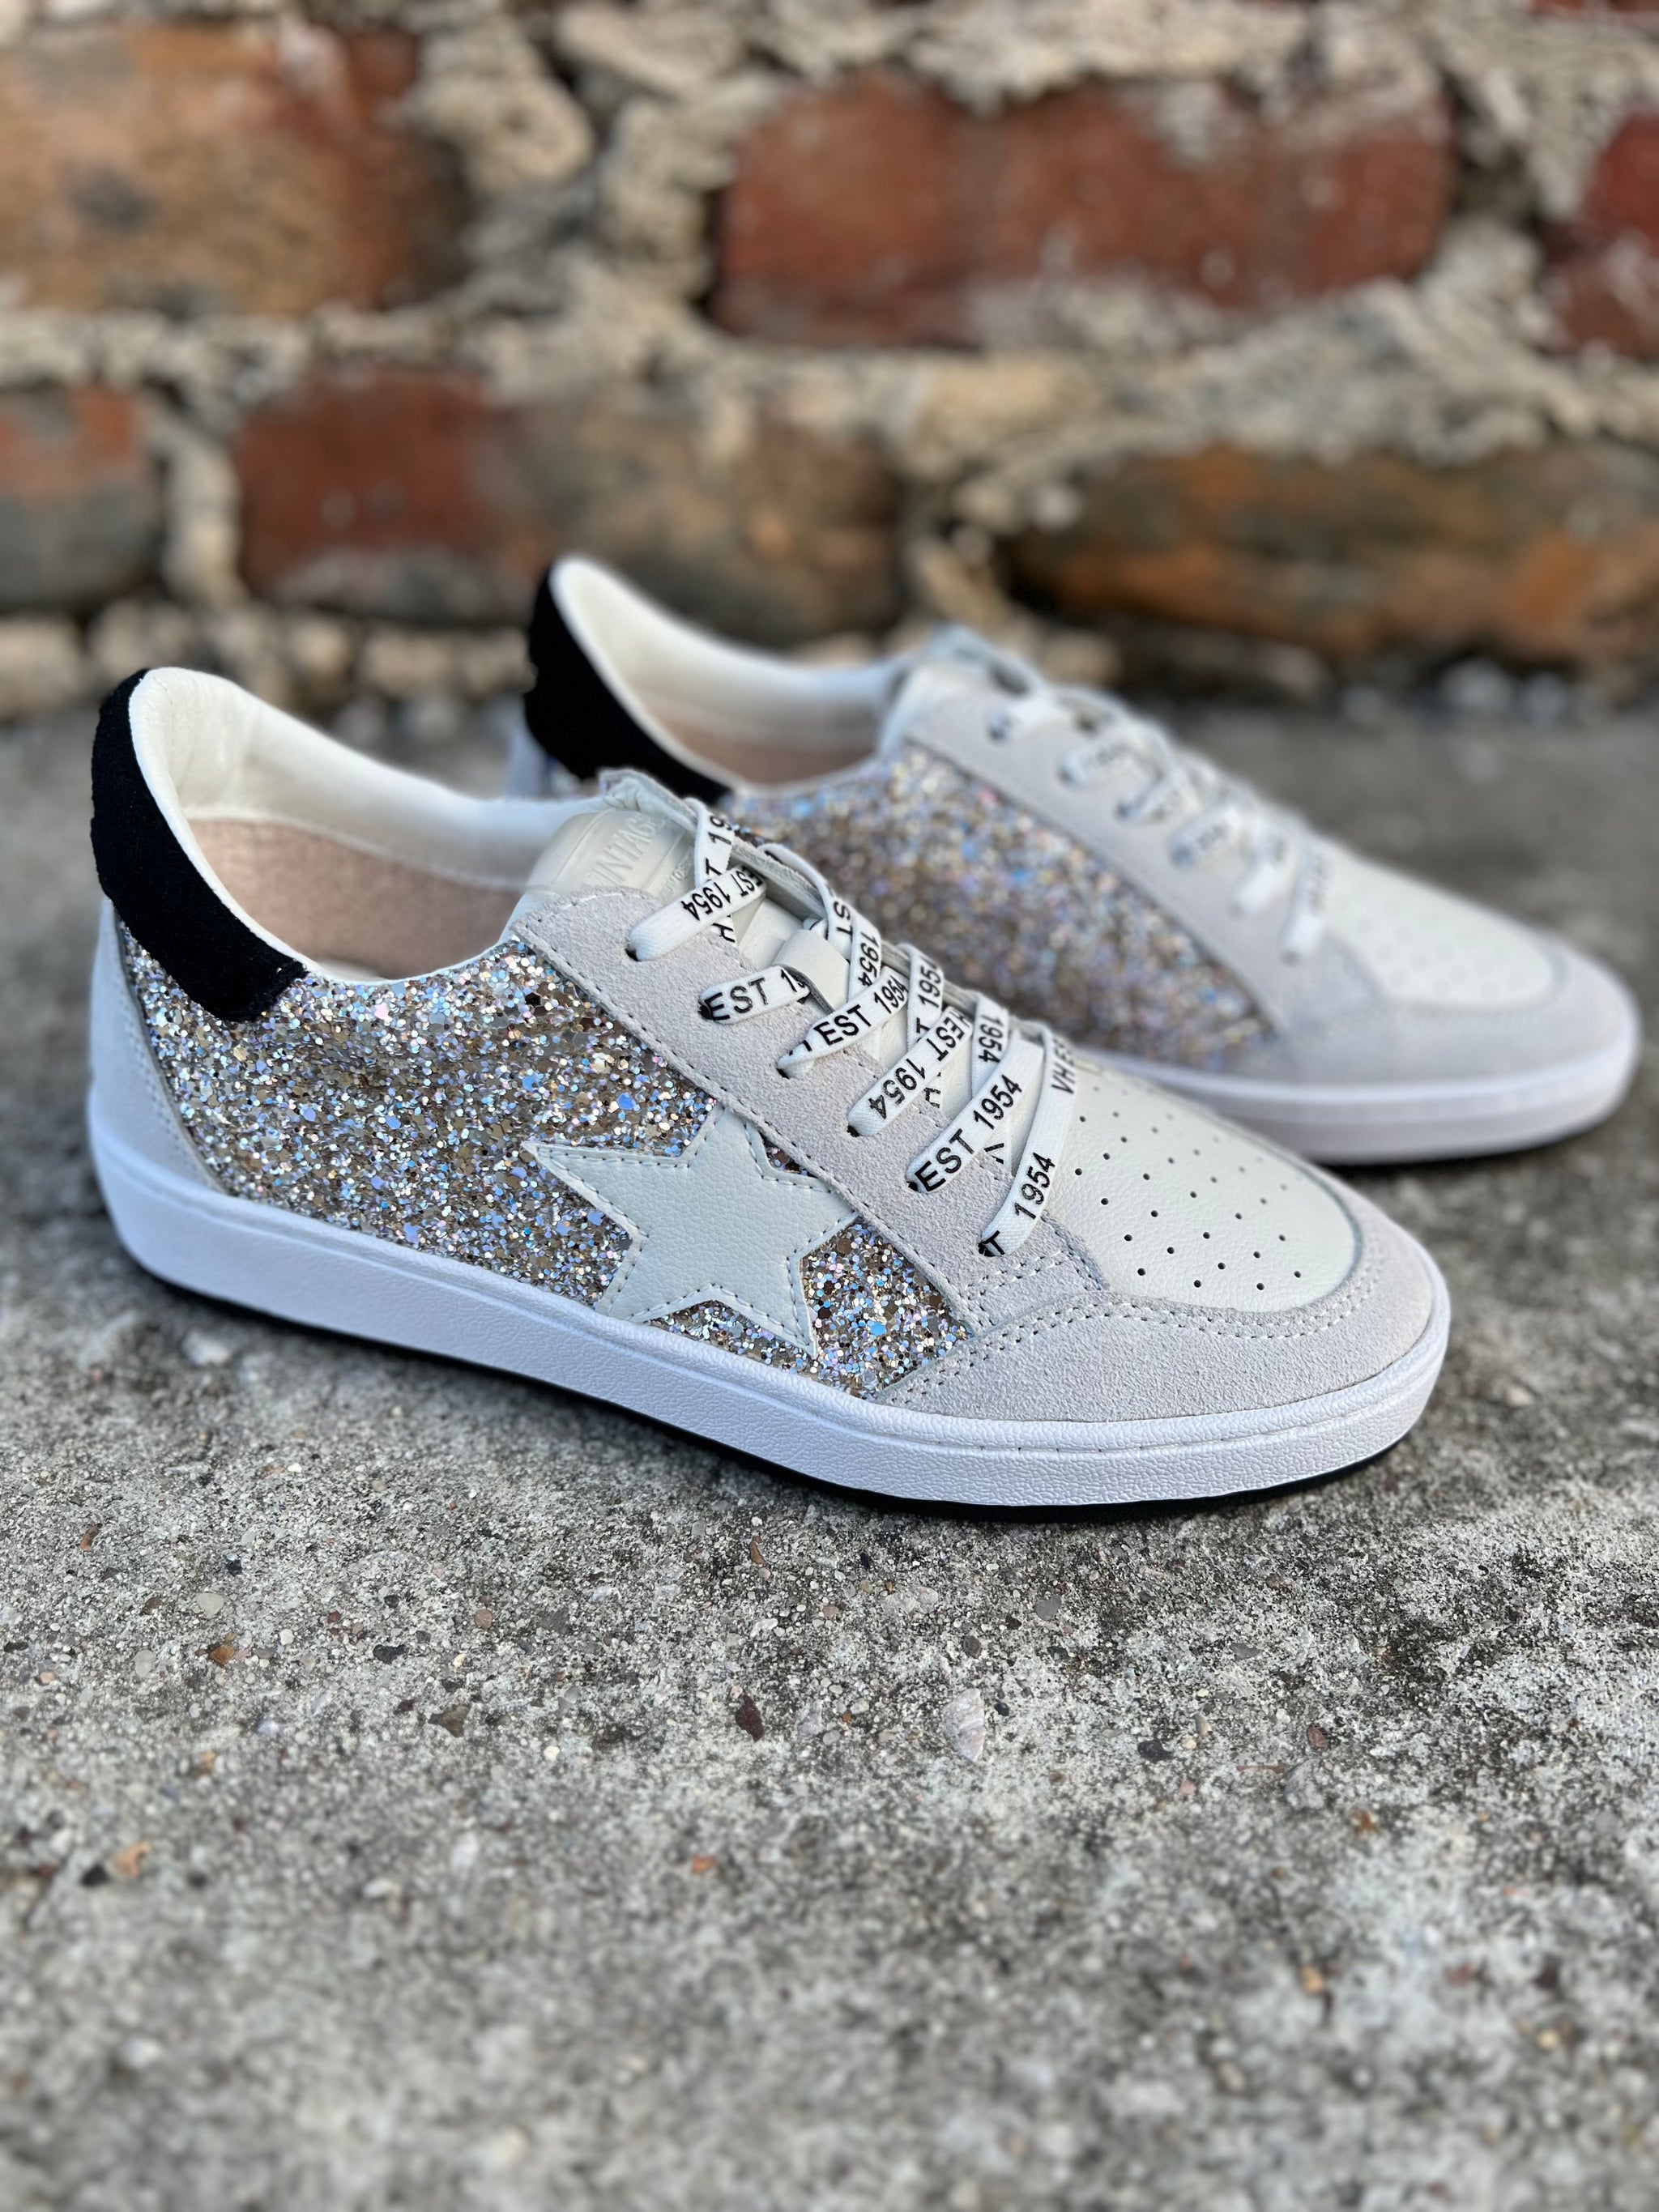 Sparkly sneakers